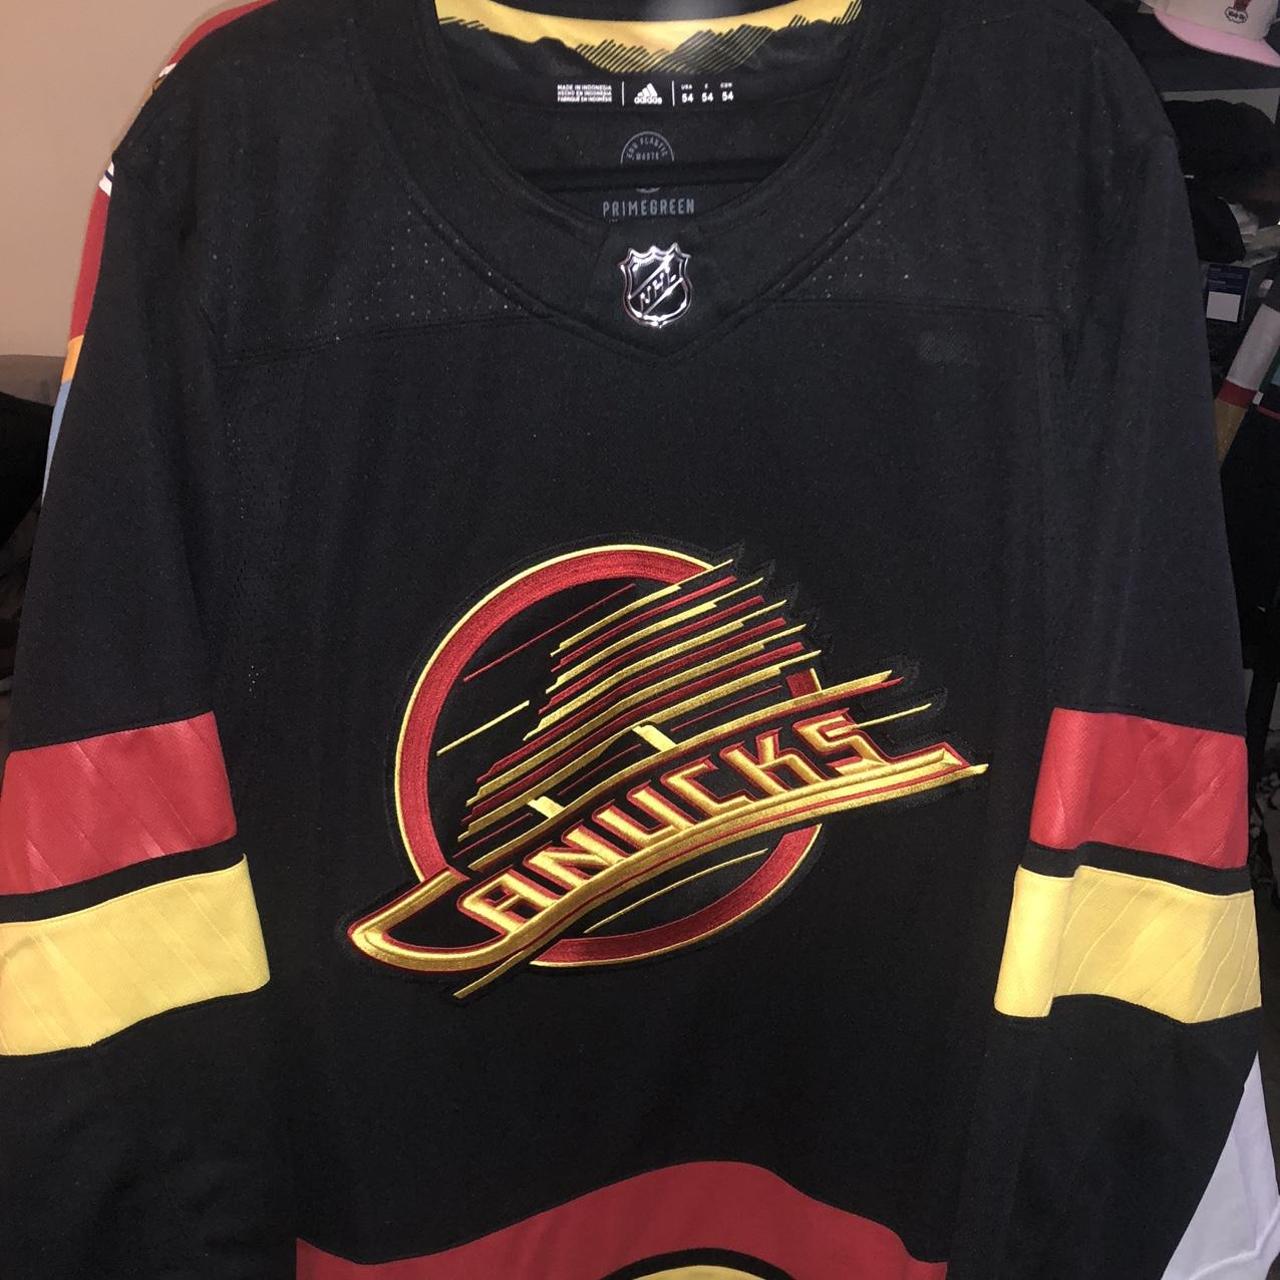 NHL Jersey Collection: Vancouver Canucks adidas alternate 